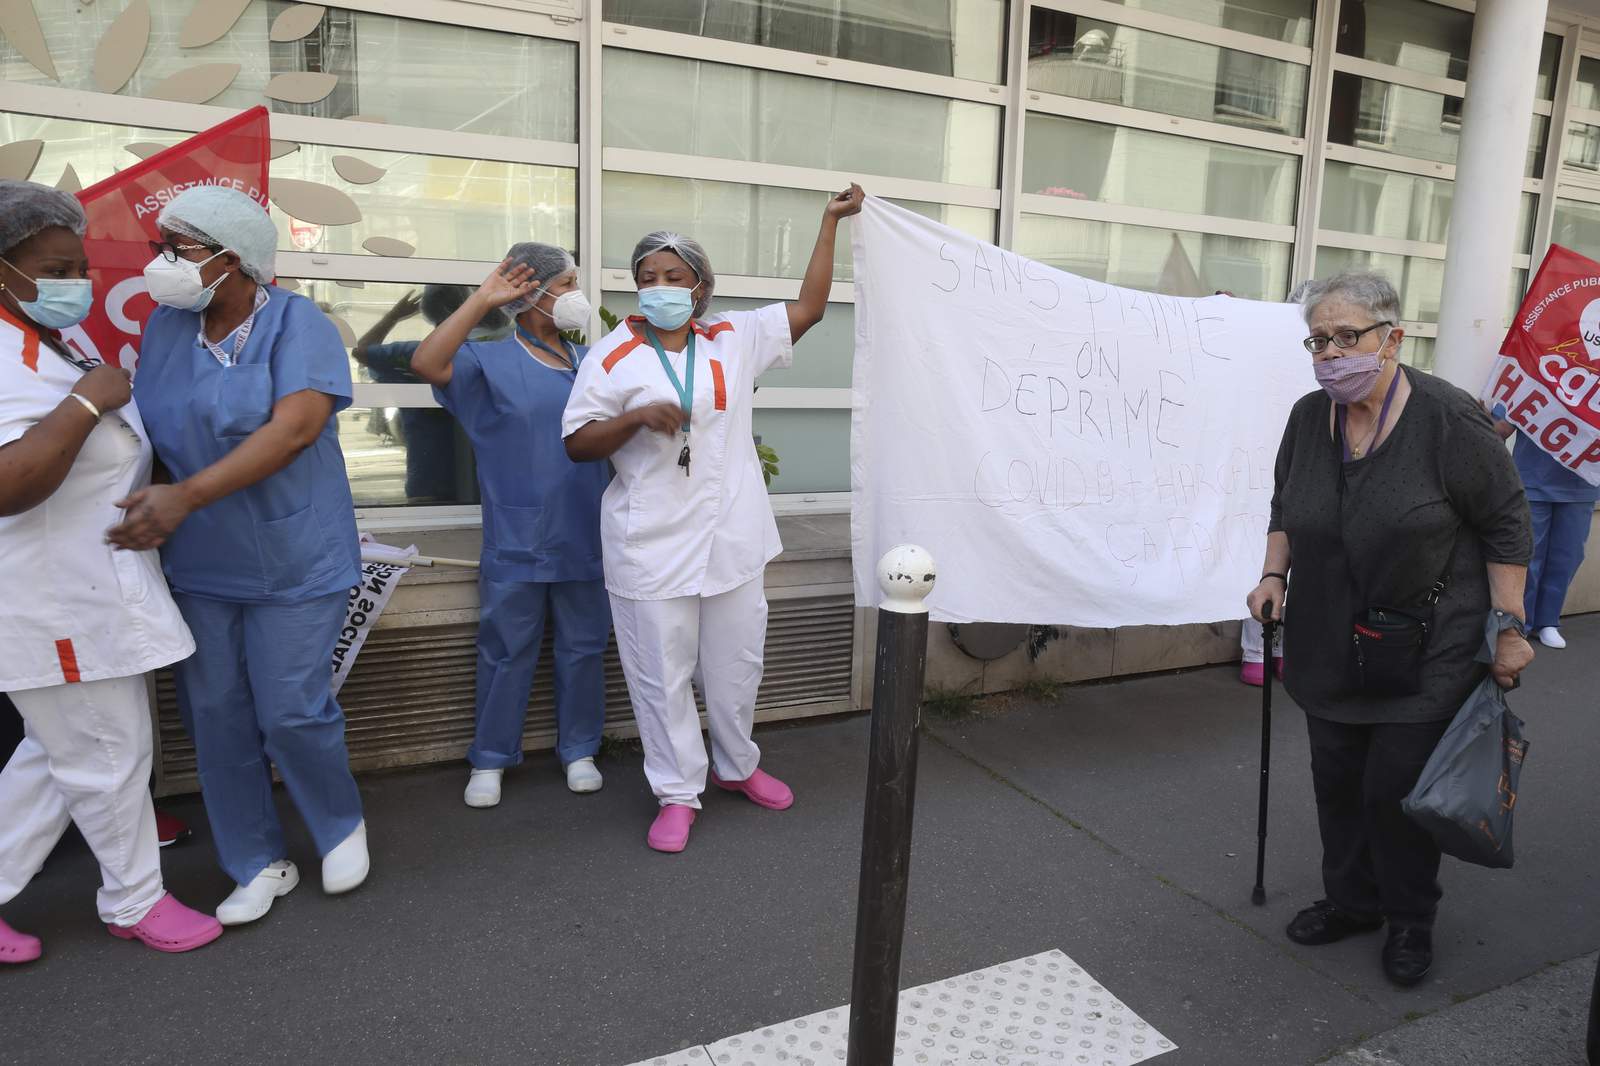 French nursing homes employees protest pay, conditions